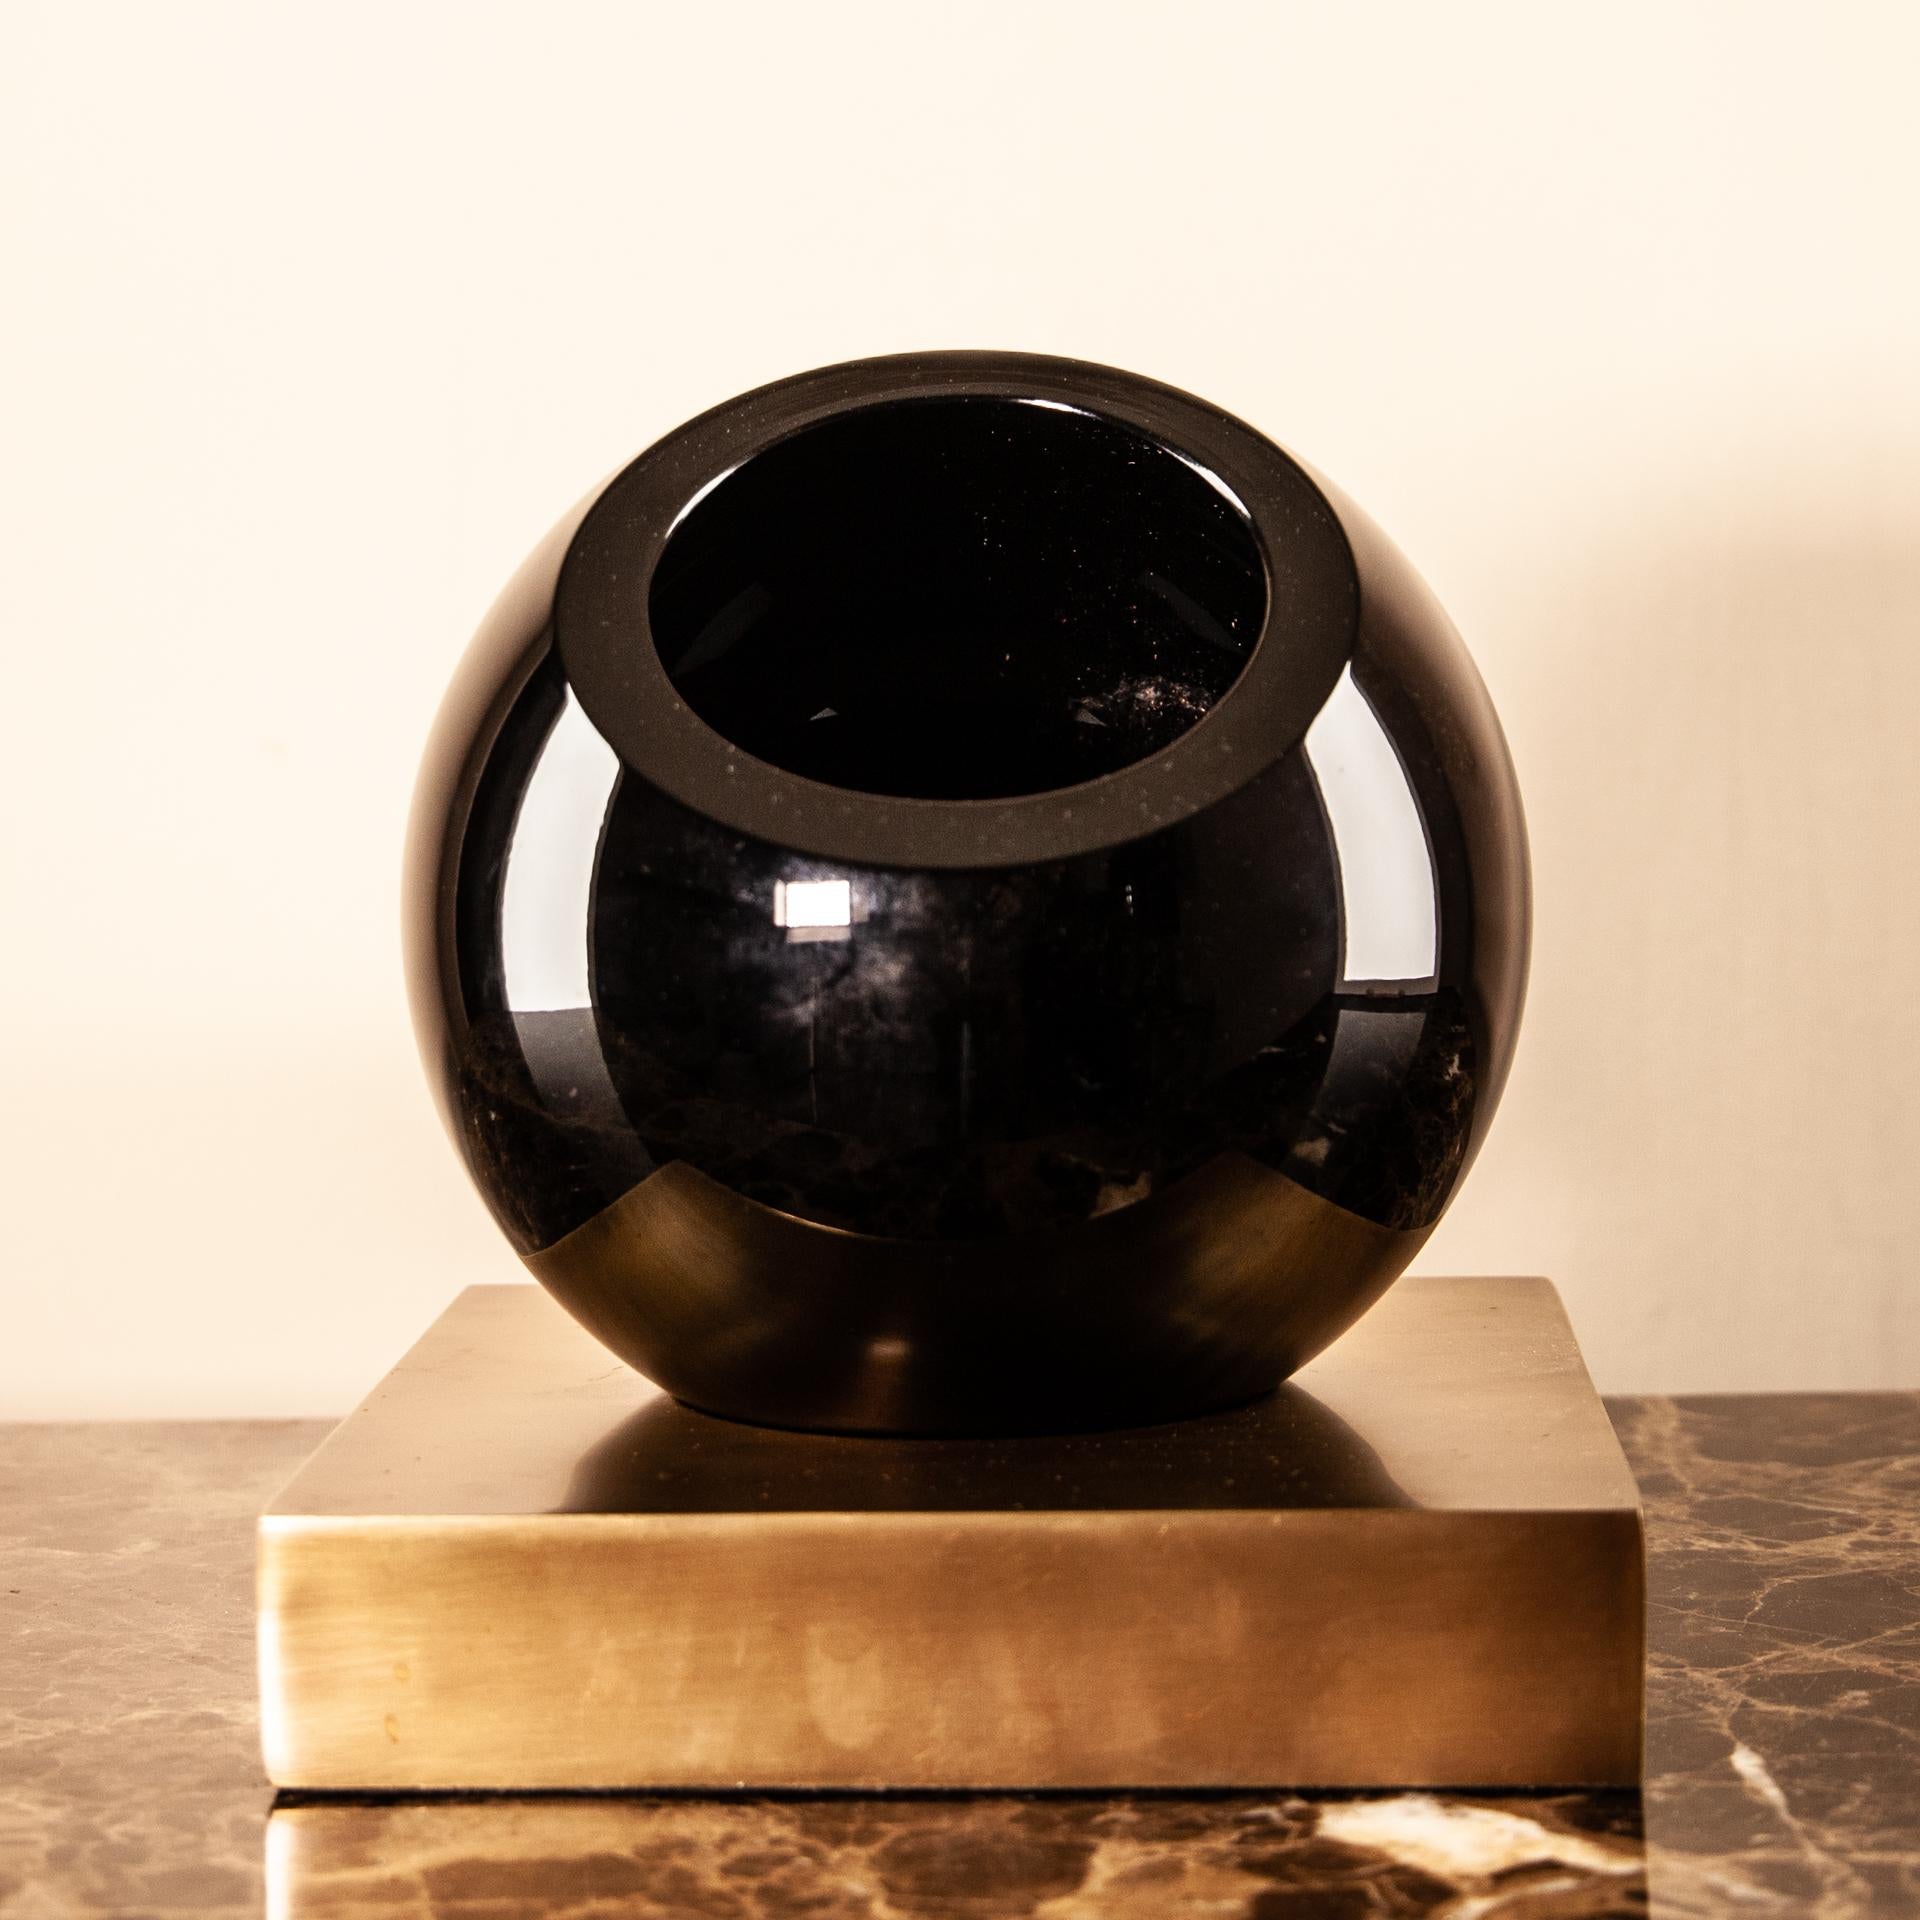 Vase Globo, black crystal and base in solid brass.
Made in Florence, Tuscany, by Selezioni Domus Firenze
Luxury furniture and fixtures for beautiful homes
see photos of details
Reference: Globo Cristallo Nero
Dimensioni:
- Profondità 20 cm